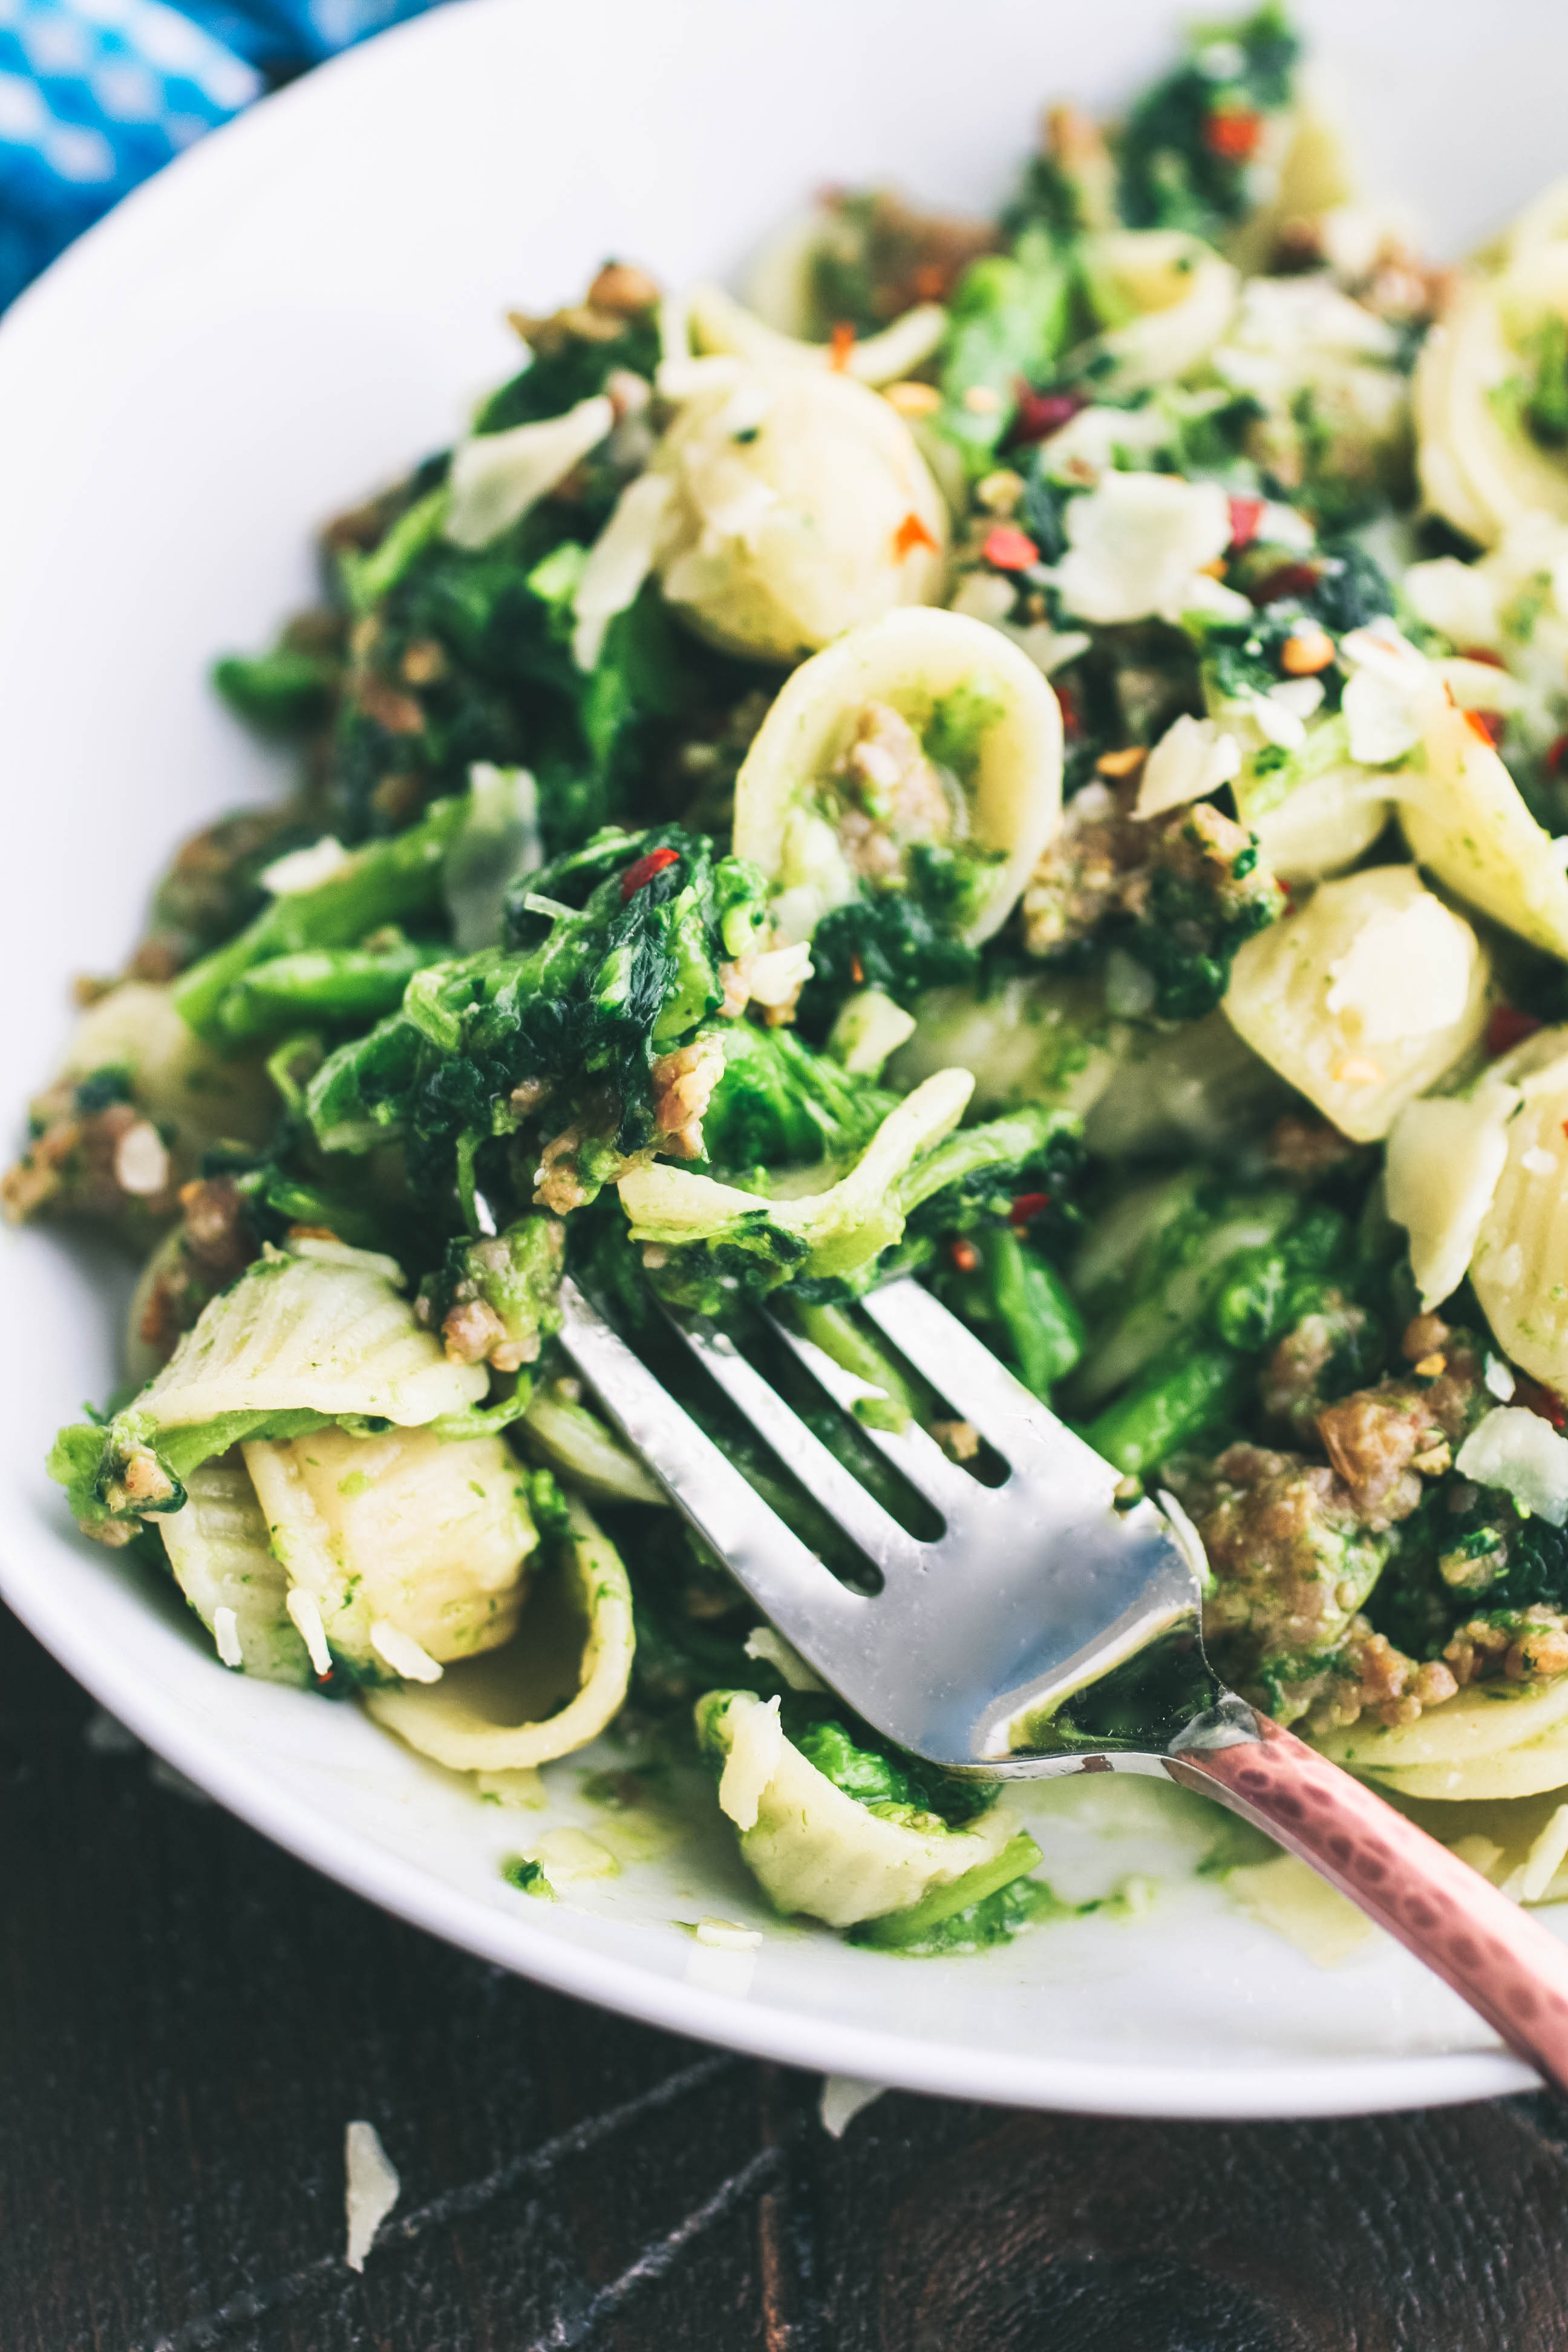 Pasta with Sausage and Rapini is a dish you'll enjoy digging into! Pasta with Sausage and Rapini is so tasty and easy to make.